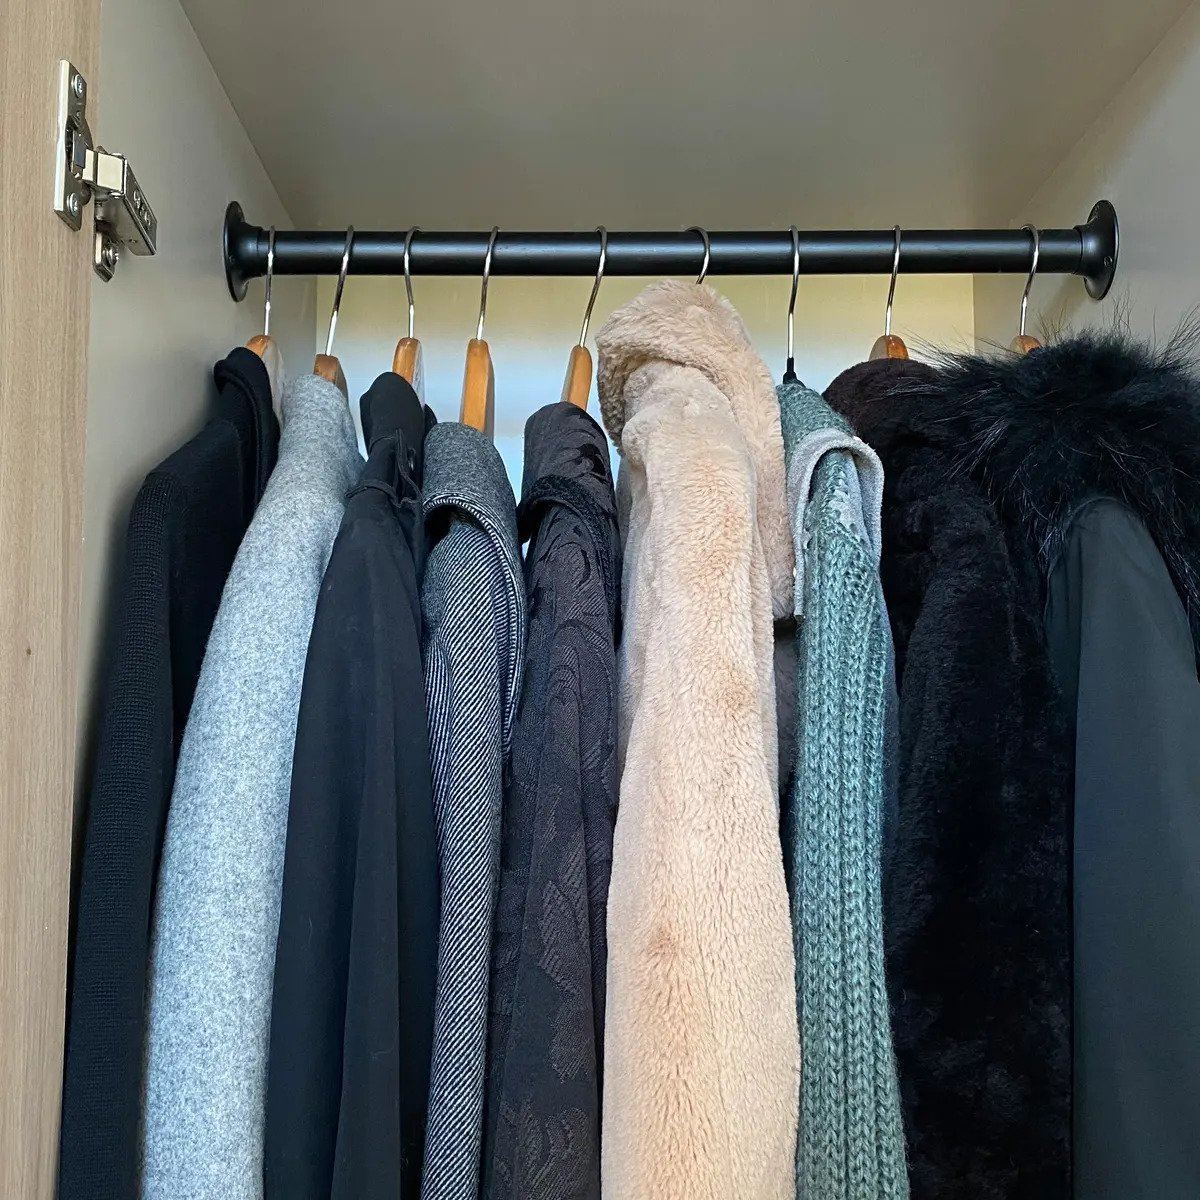 How To Store Winter Clothing